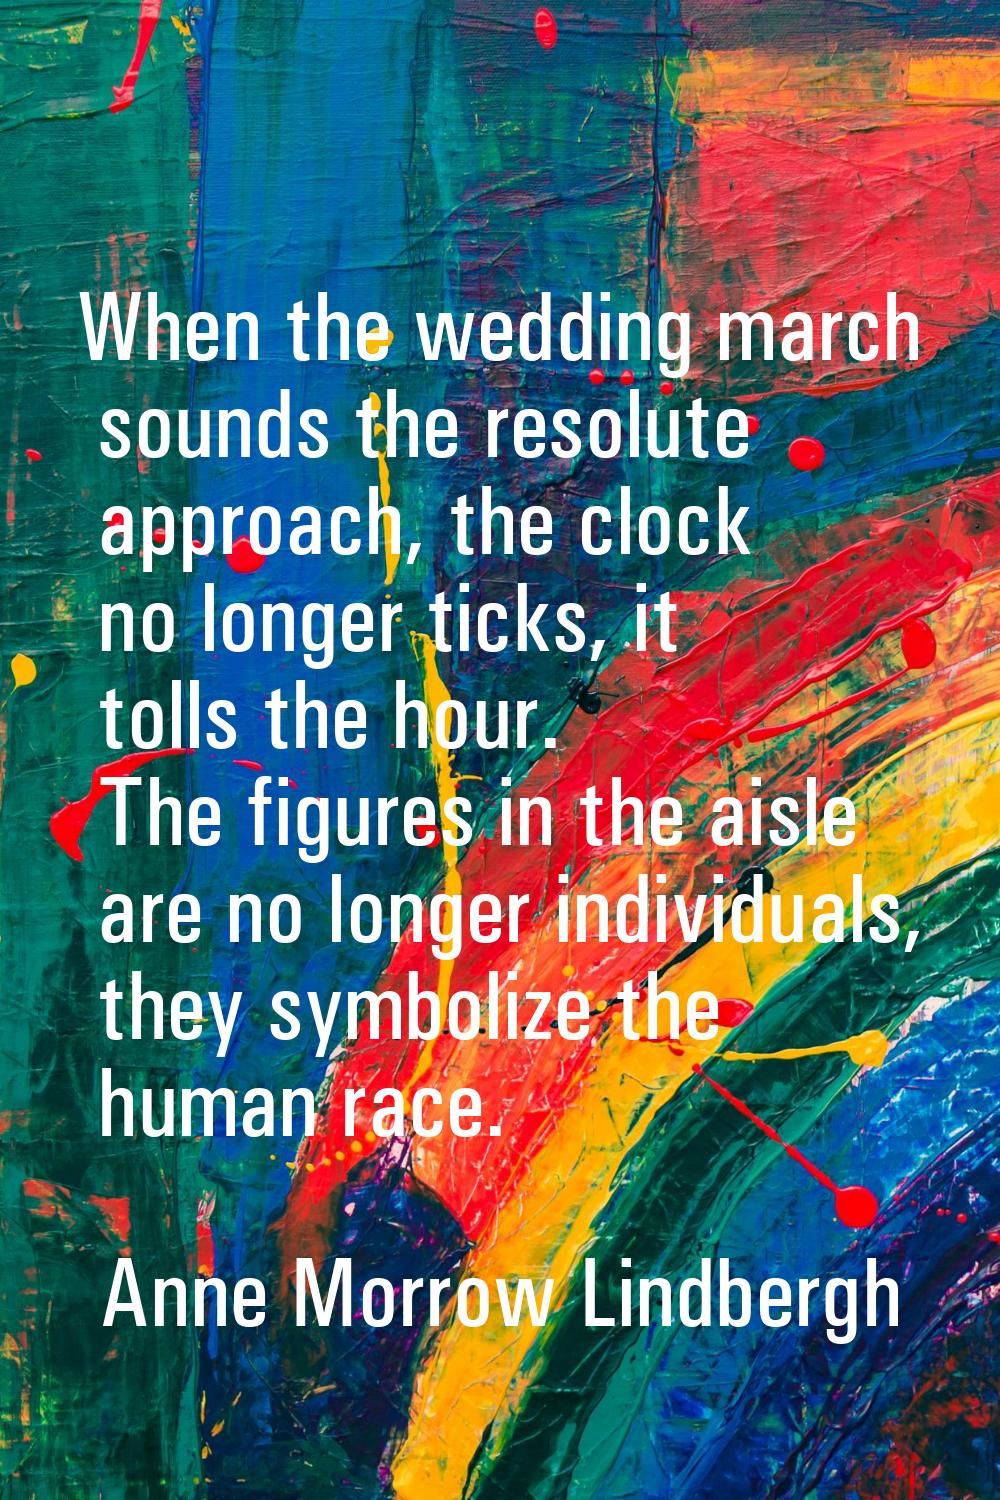 When the wedding march sounds the resolute approach, the clock no longer ticks, it tolls the hour. 